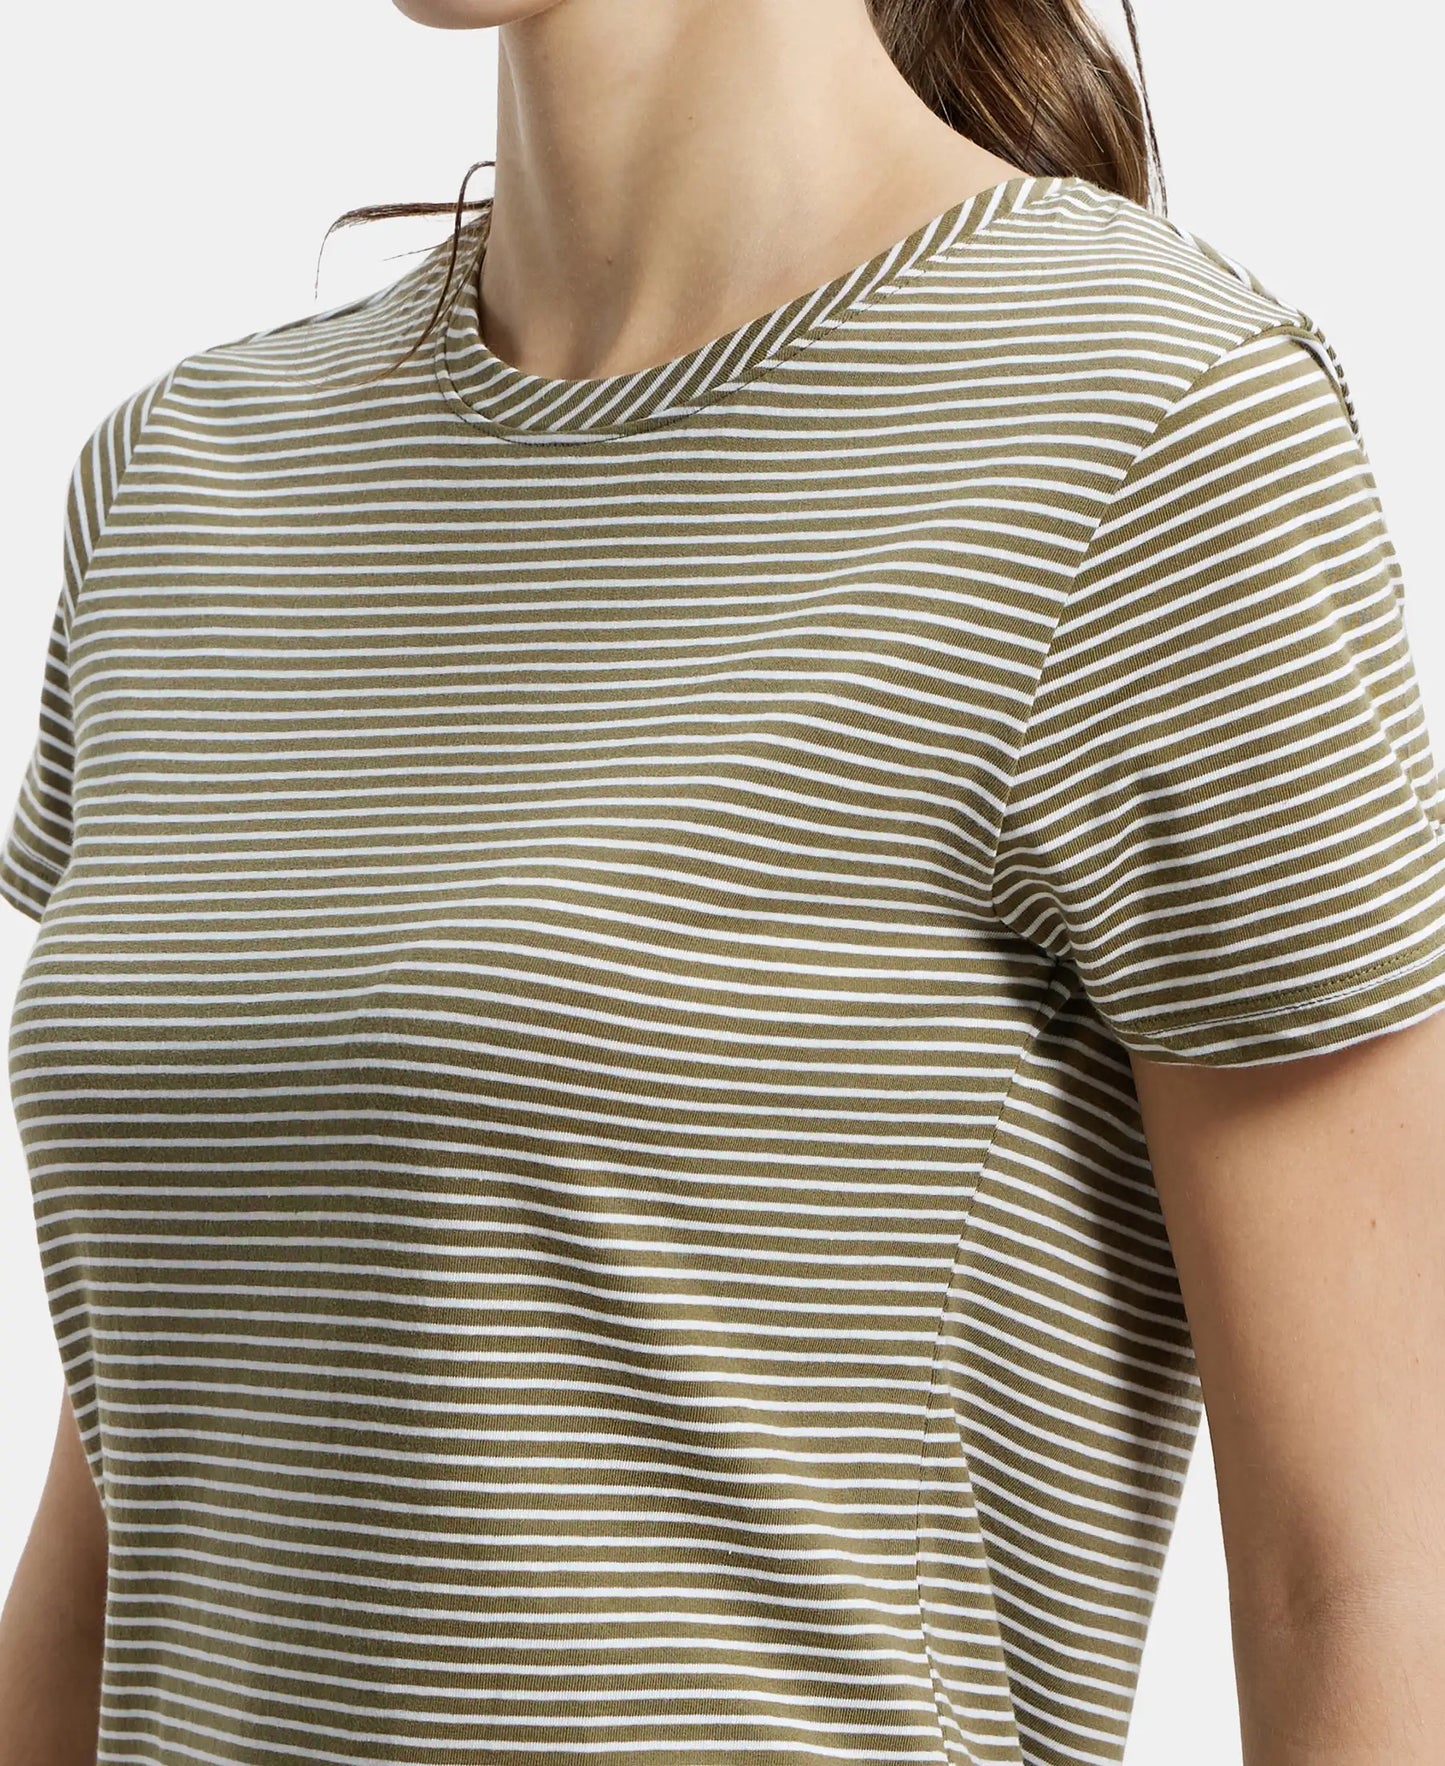 Super Combed Cotton Stripe Fabric Relaxed Fit Round Neck Half Sleeve T-Shirt with Curved Hem Styling - Burnt Olive-6